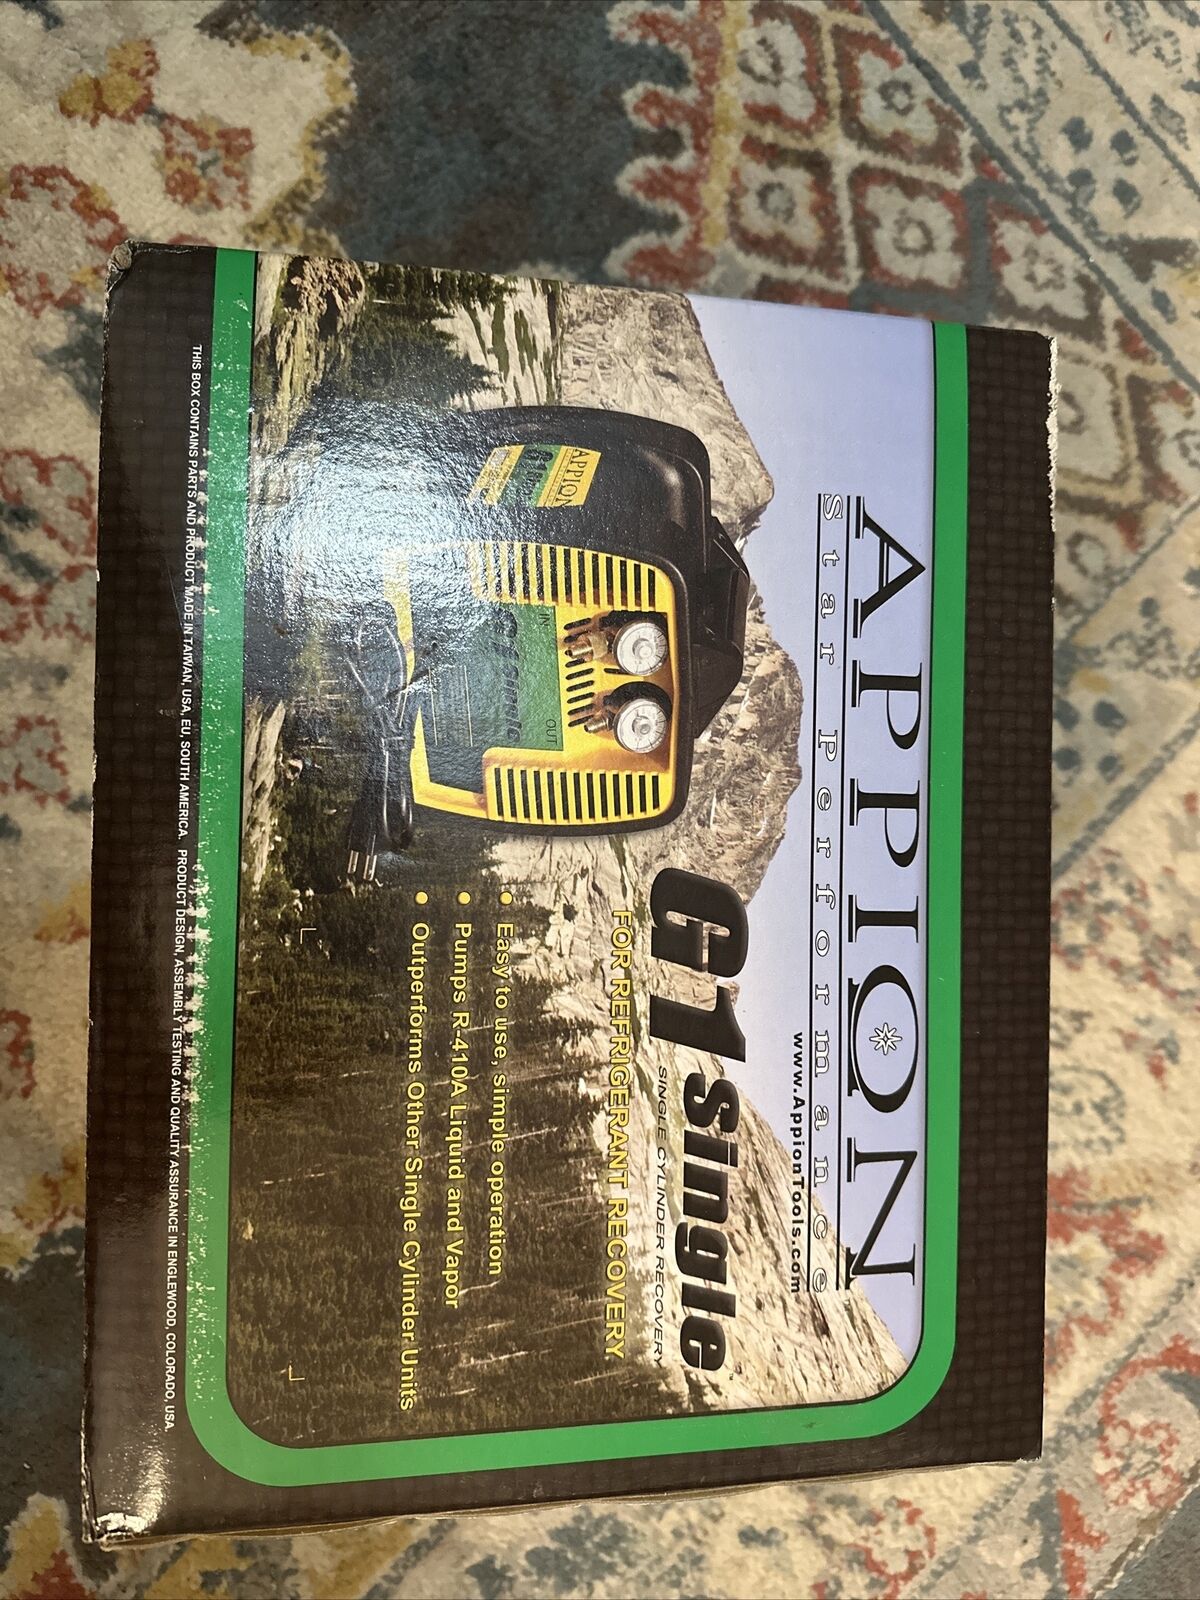 Appion G1 single Brand New In Box. Never Opened Never Used.